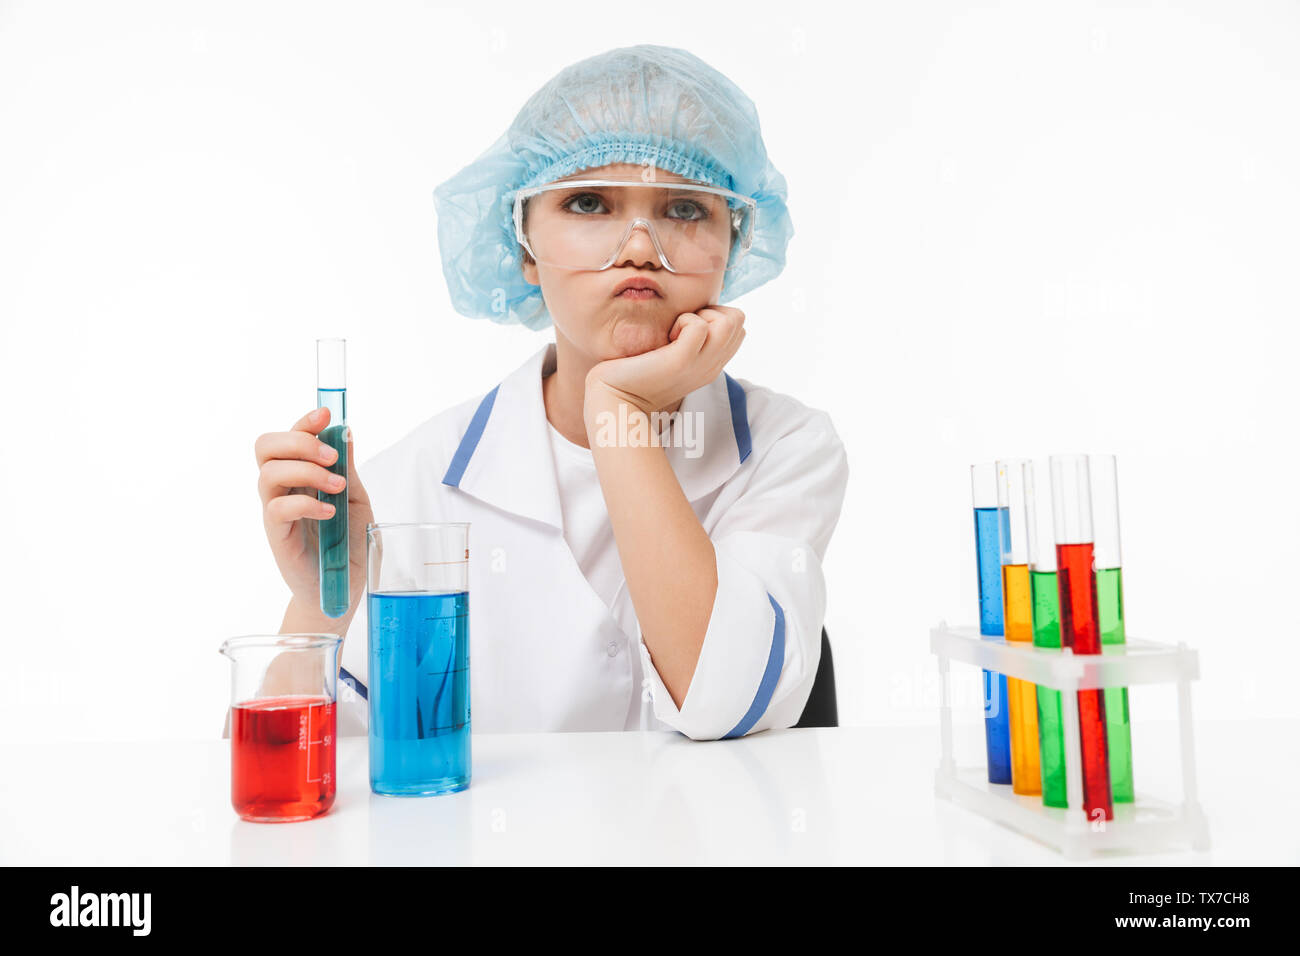 Portrait of focused little girl in white laboratory coat making chemical experiments with multicolored liquid in test tubes isolated over white backgr Stock Photo